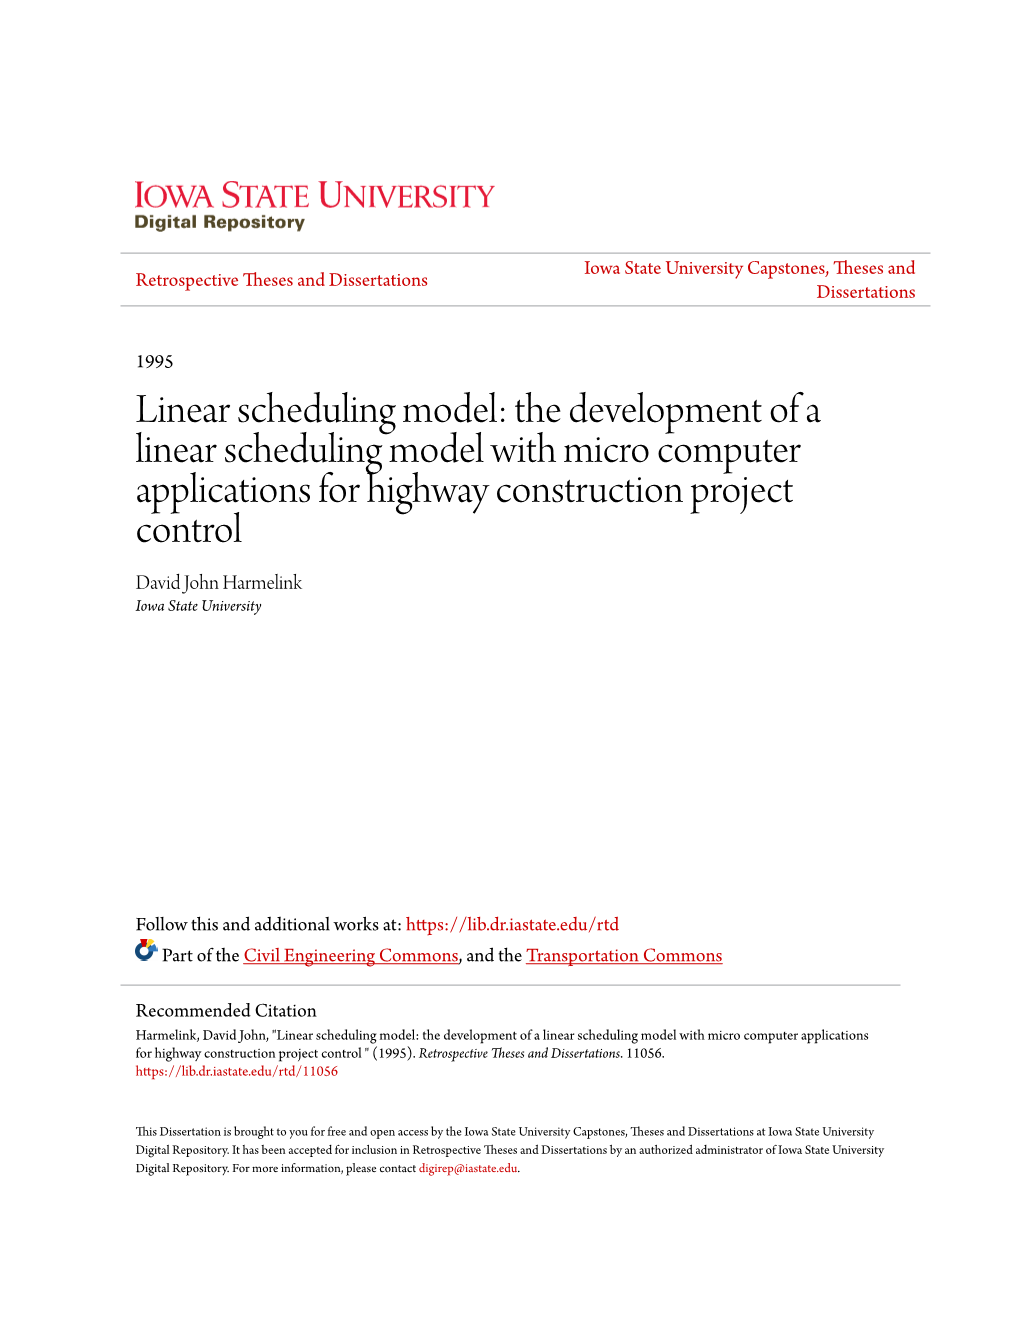 The Development of a Linear Scheduling Model with Micro Computer Applications for Highway Construction Project Control David John Harmelink Iowa State University